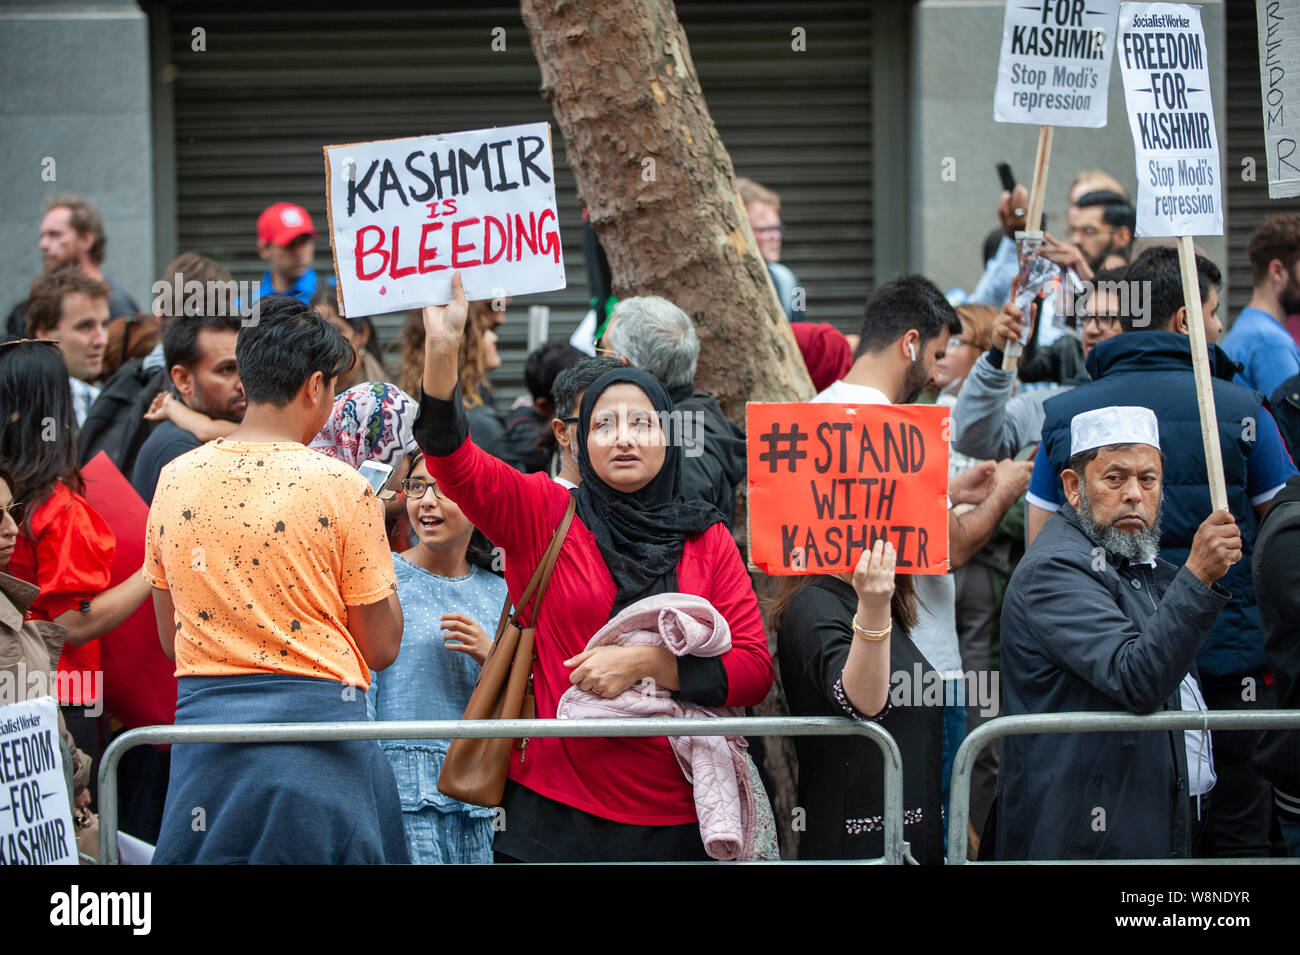 London, England. 10th August, 2019. Demonstrators gathered outside India House in London to show support for Kashmiris and to protest against occupation and oppression by India in Kashmir.  Credit: Richard Hancox. Stock Photo